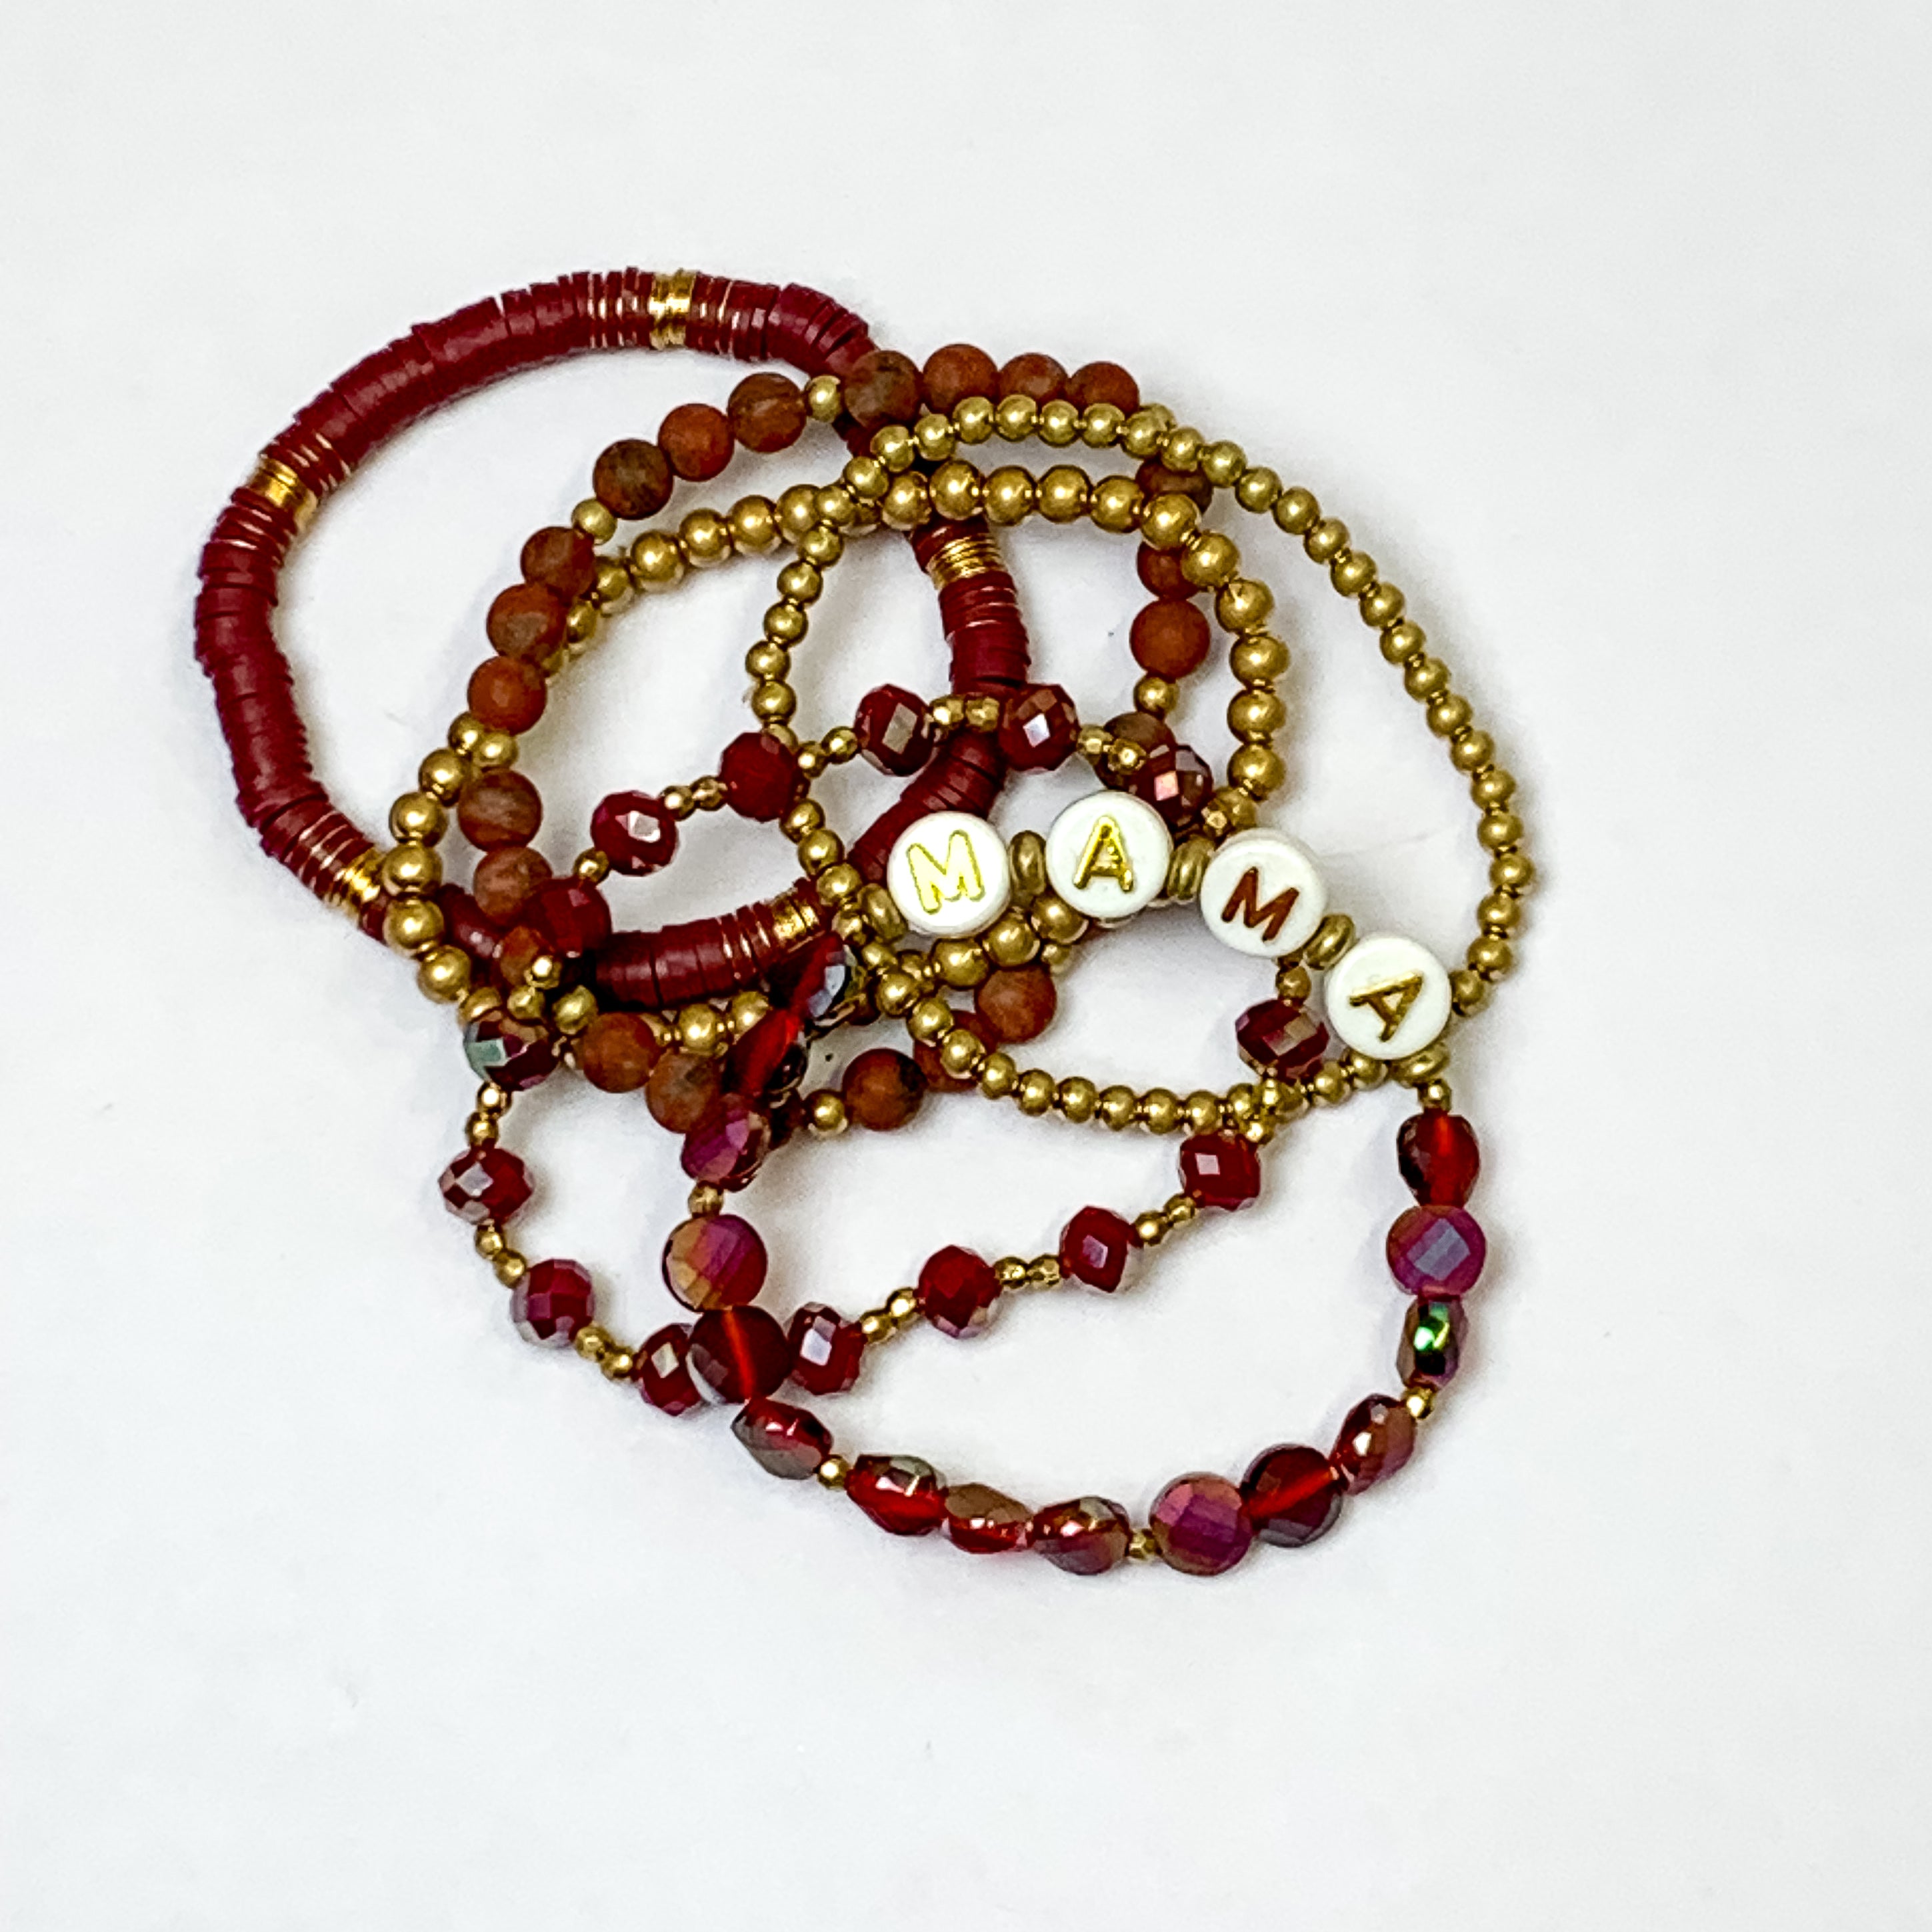 MAMA Disk Beaded Bracelet Set in Maroon and Gold - Giddy Up Glamour Boutique